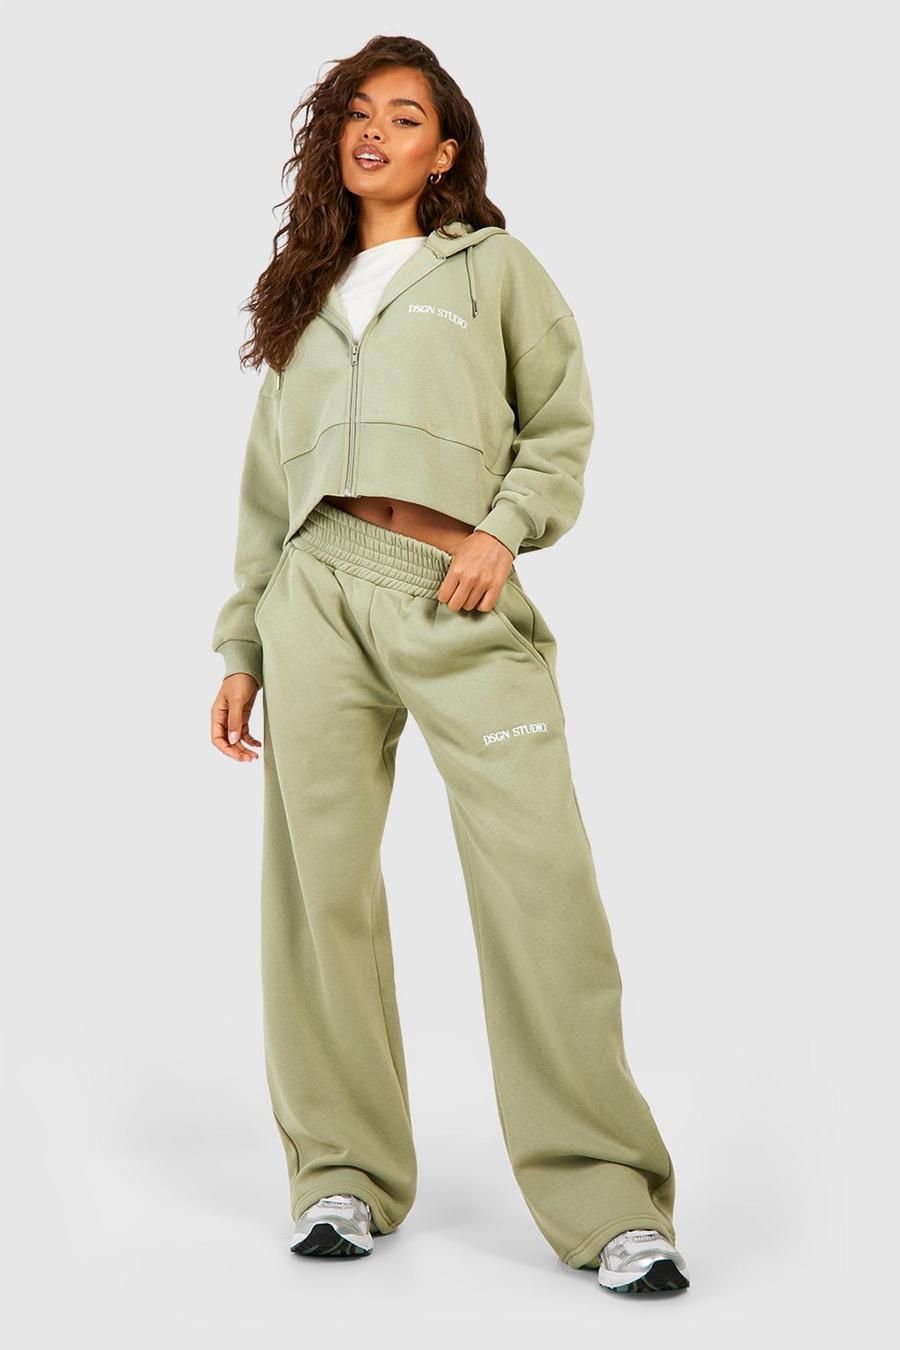 Sage Dsgn Studio Cropped Zip Through Hooded Tracksuit